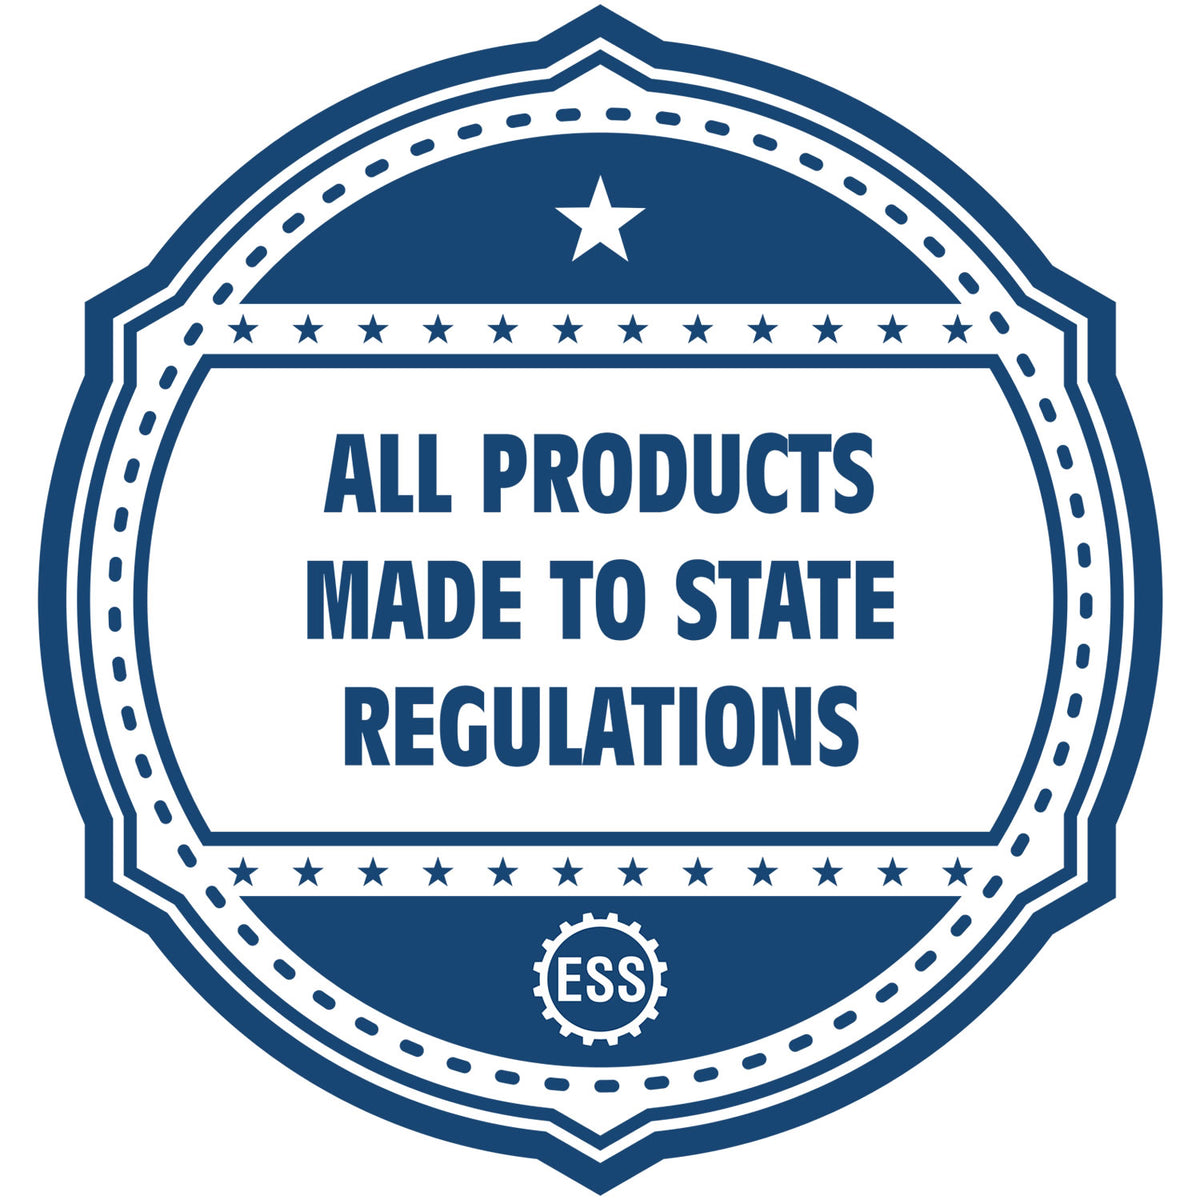 An icon or badge element for the Heavy-Duty Colorado Rectangular Notary Stamp showing that this product is made in compliance with state regulations.